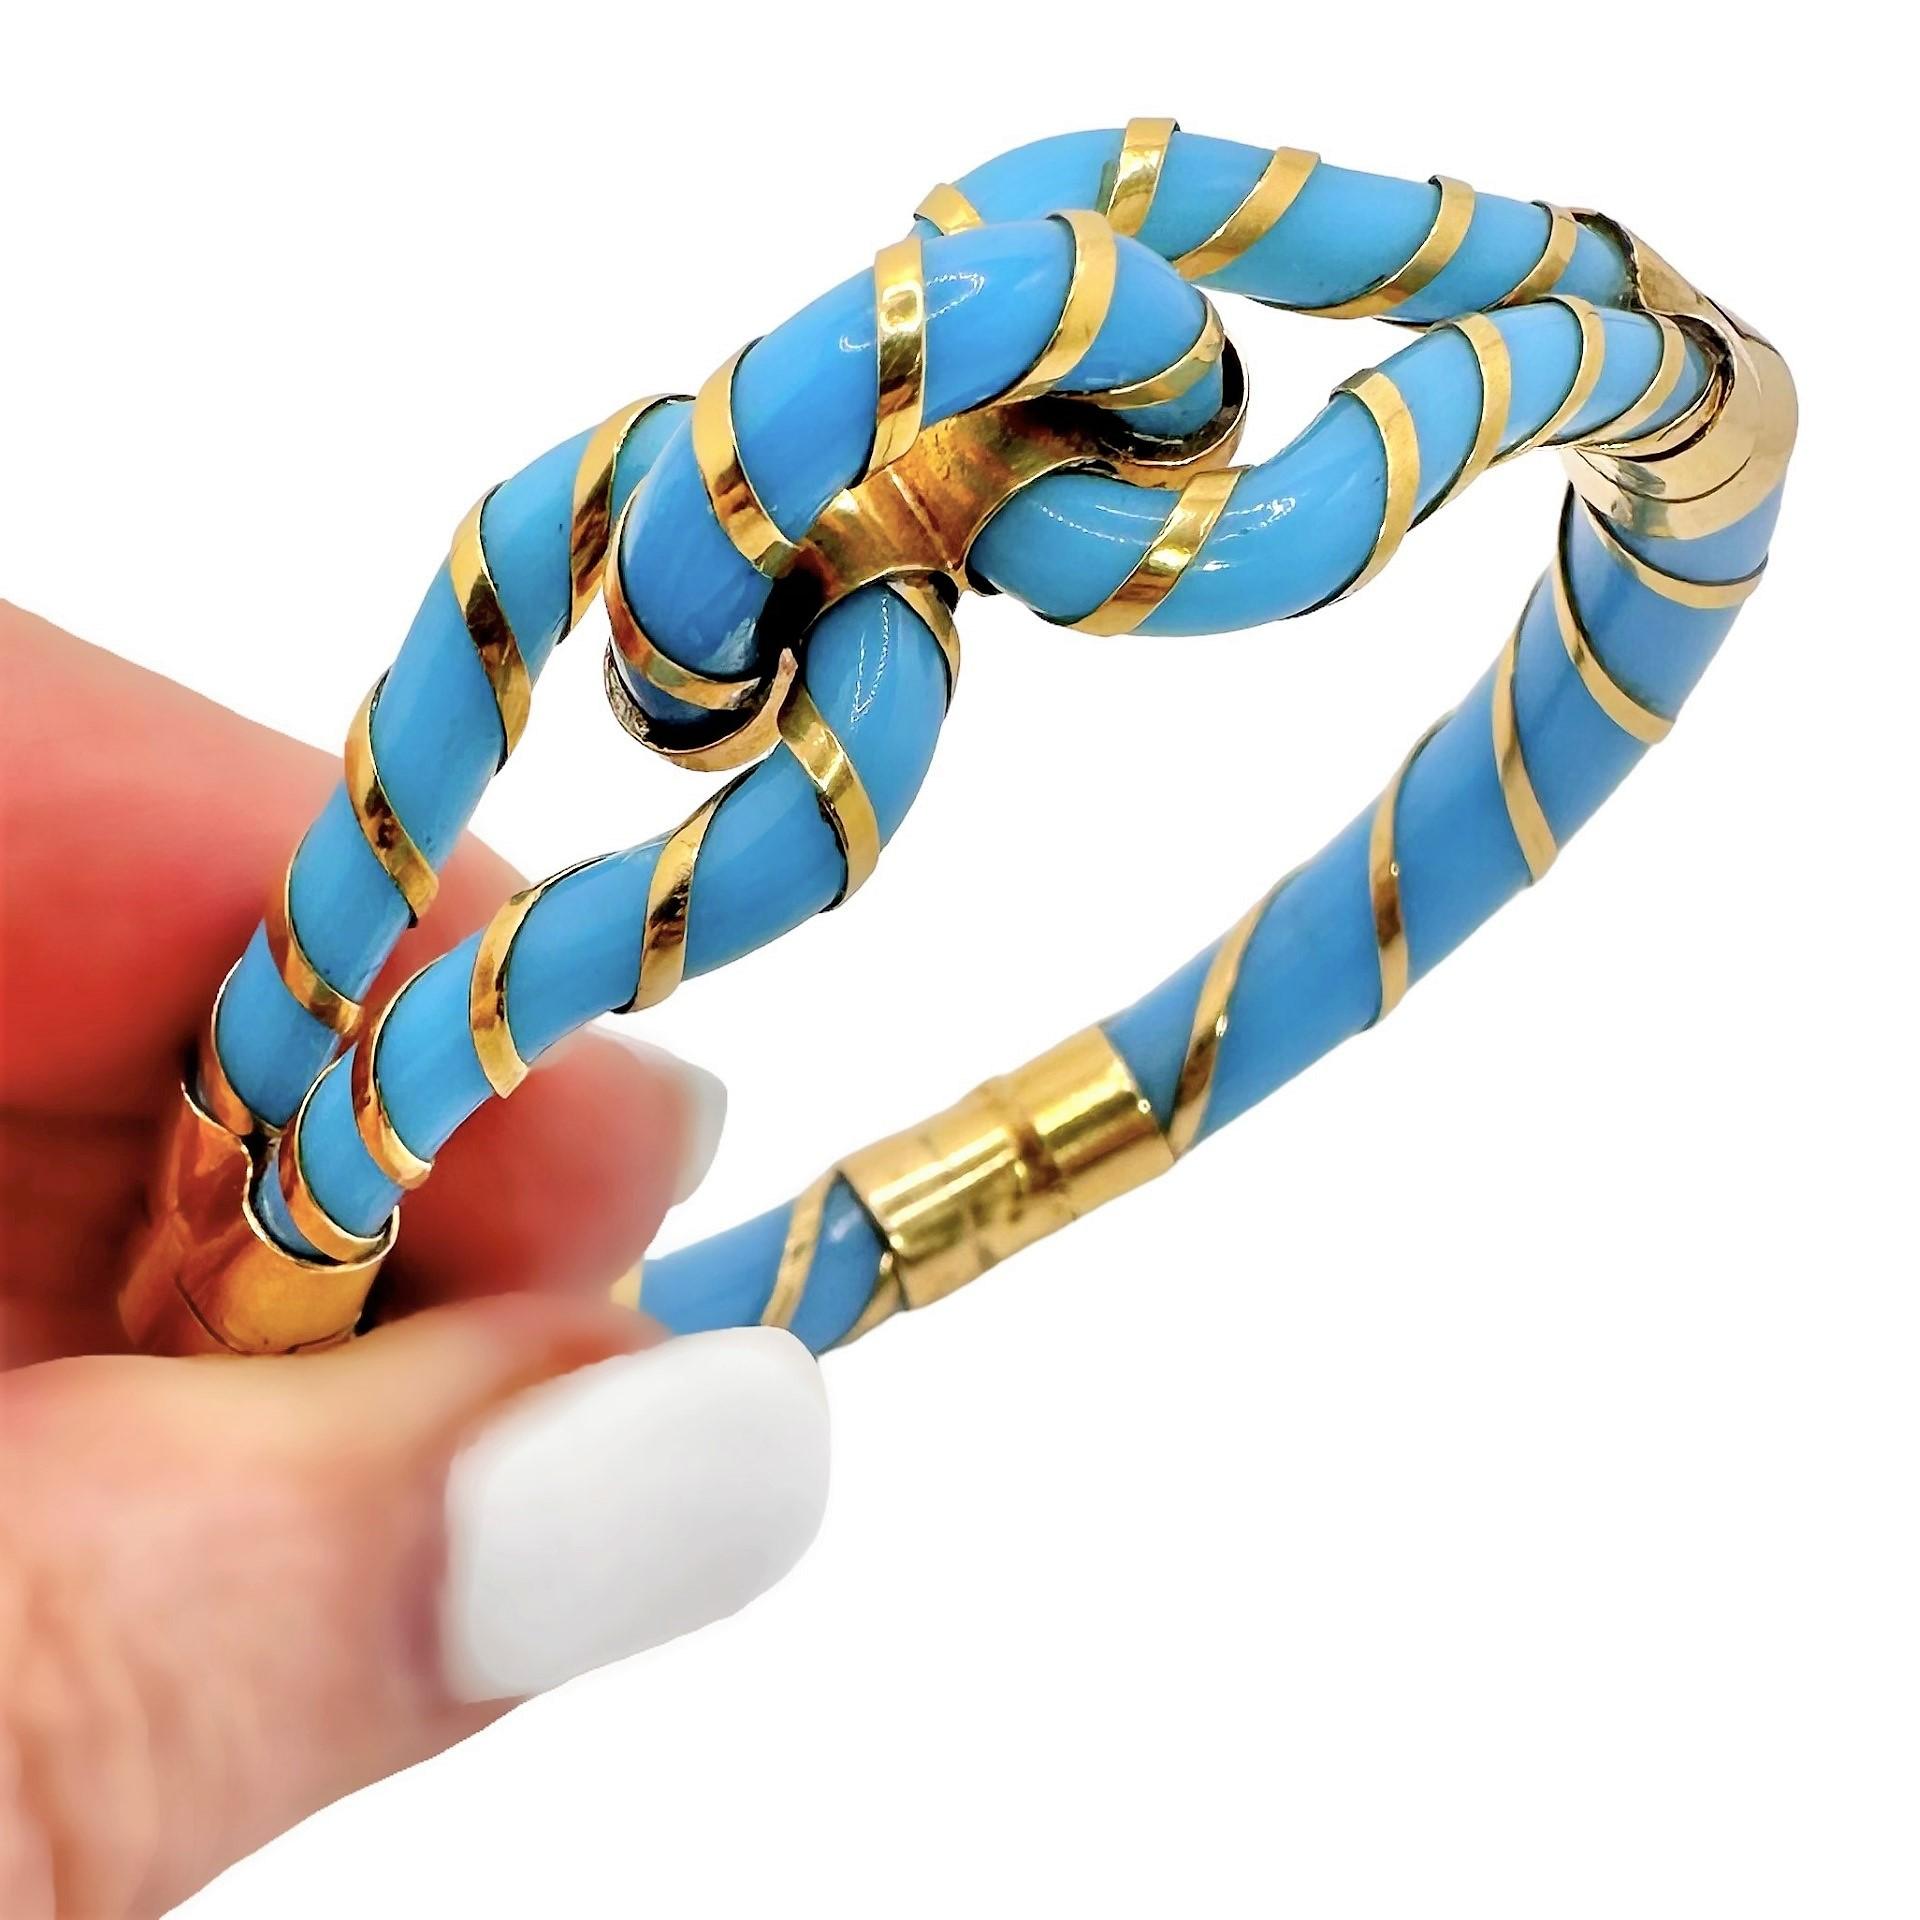 Antique Yellow Gold and Turquoise Color Glass Knot Bracelet For Sale 5